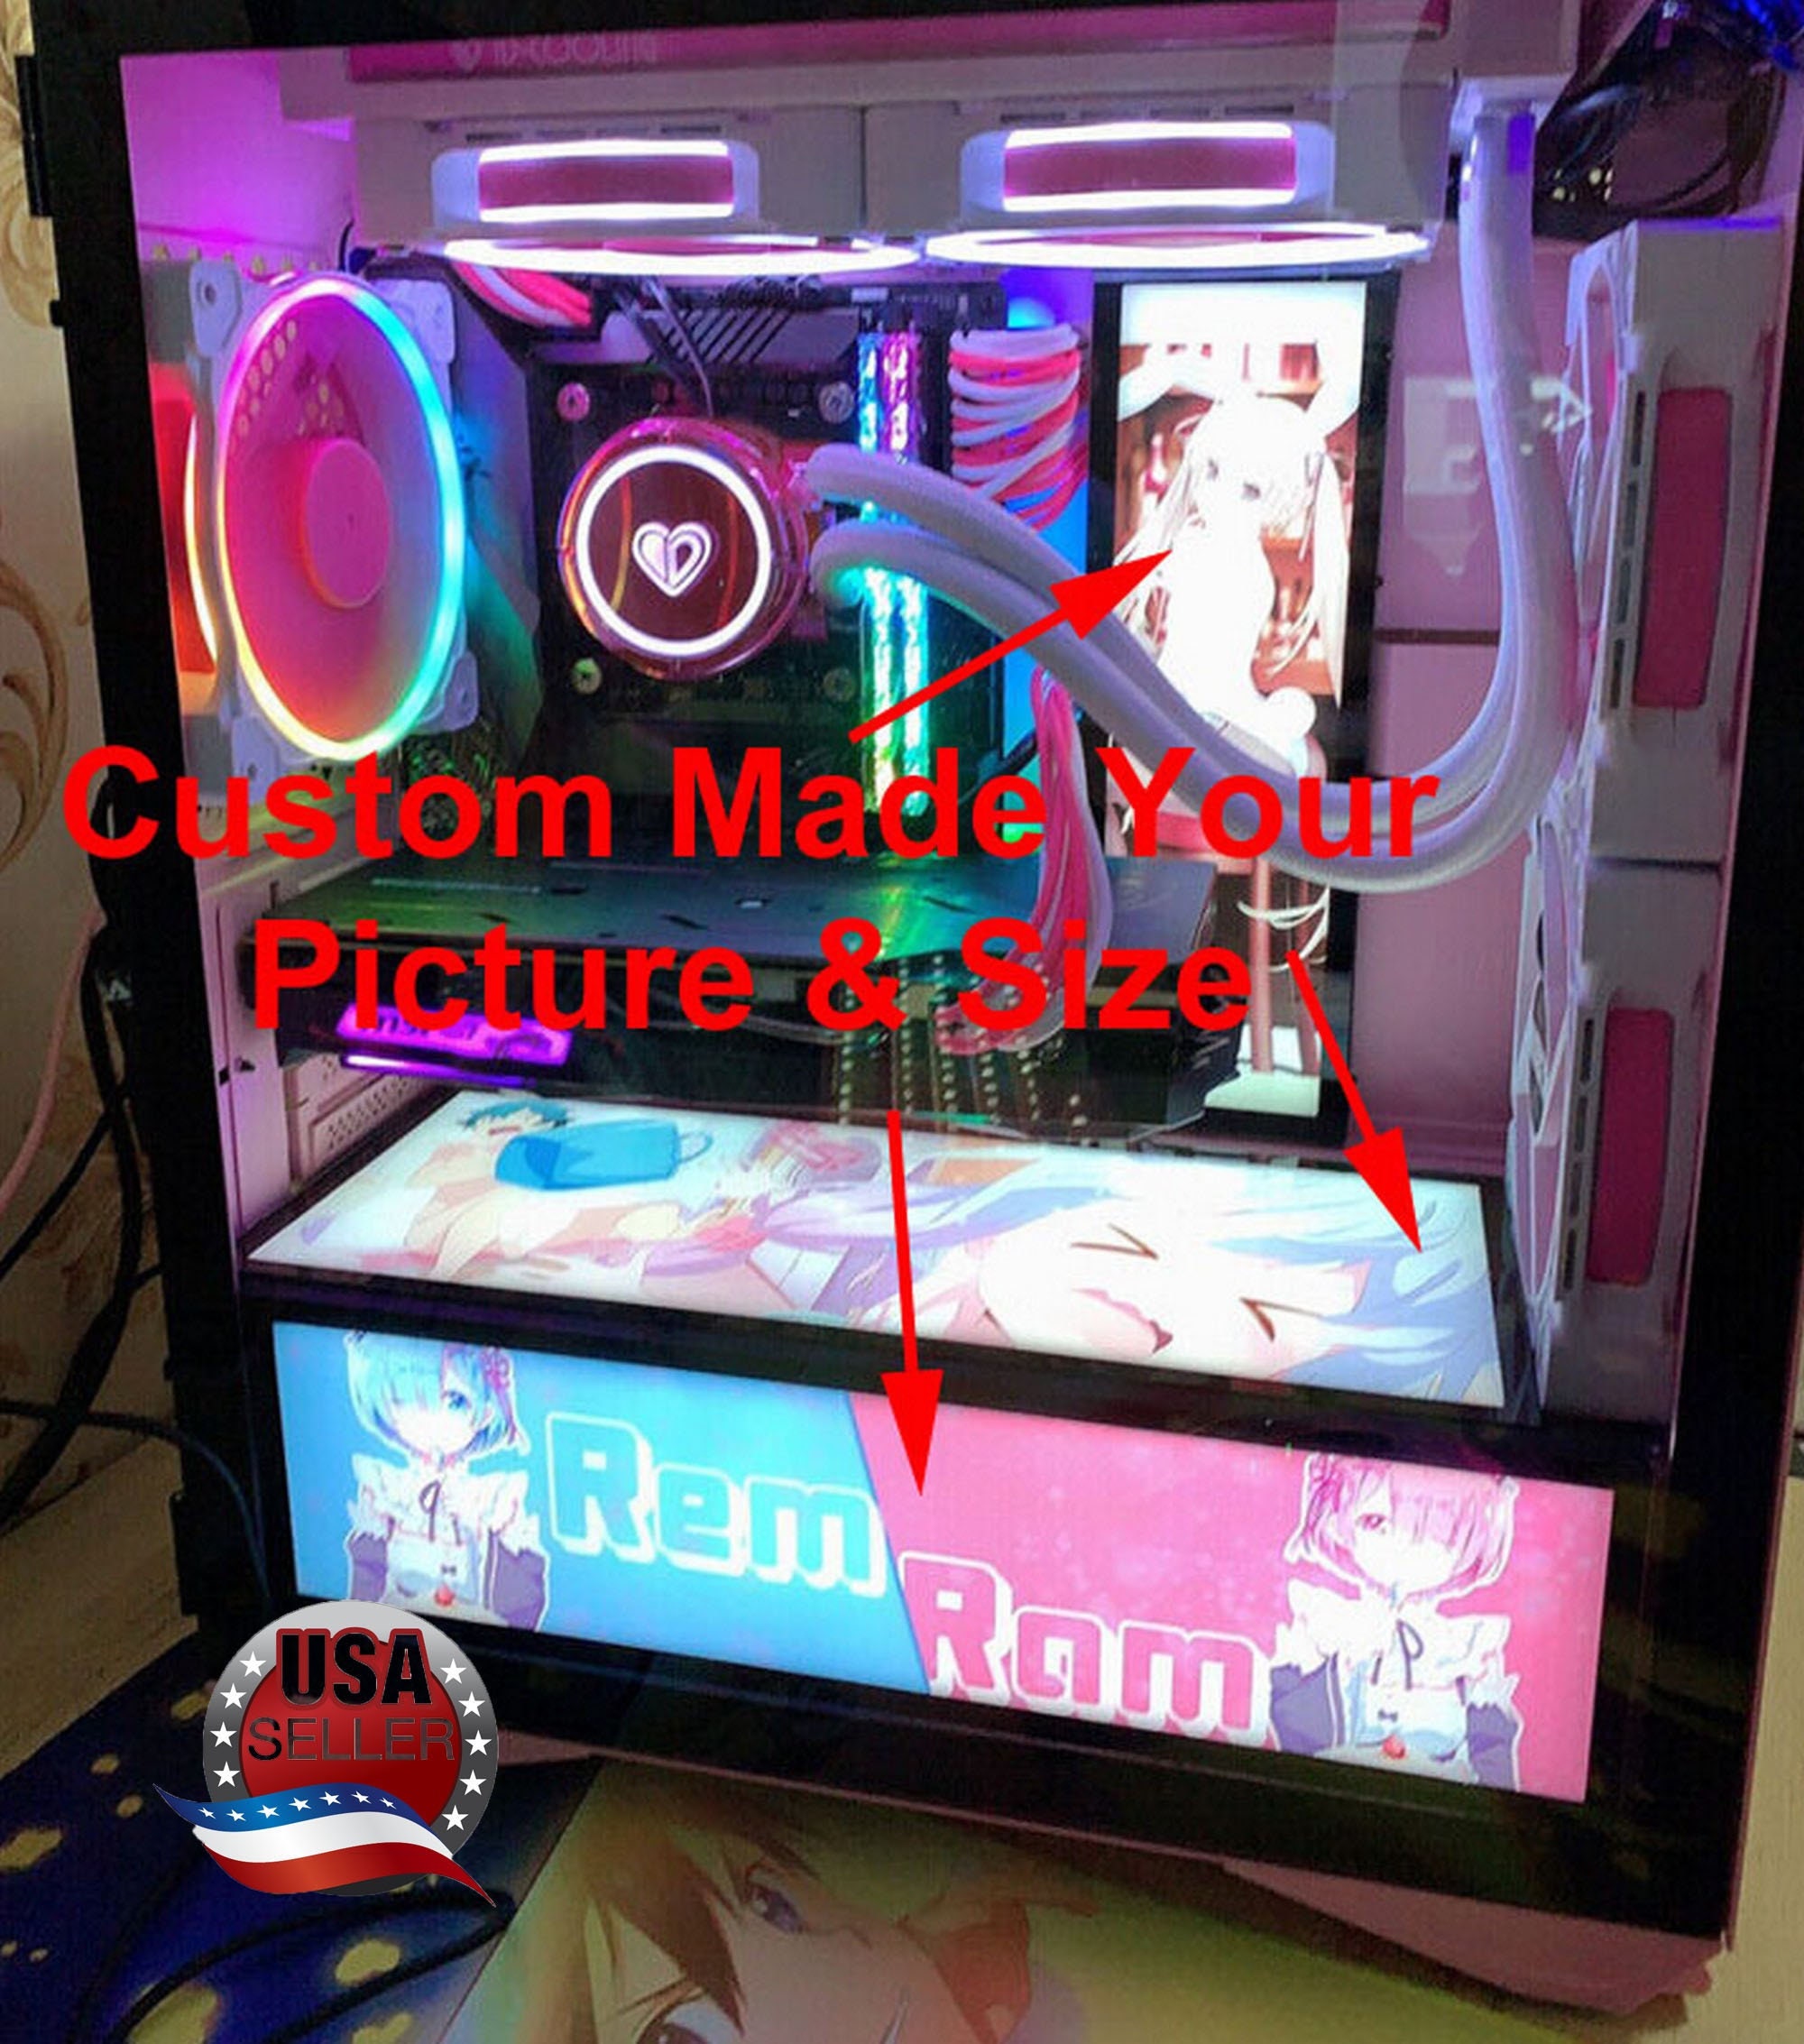 Anime Computer Case ATX Mid Tower PC Gaming Case  Front USB Port   QuickRelease Tempered Glass Side Panel  Cable Management System   WaterCooling Ready  PinkA  Amazonca Electronics